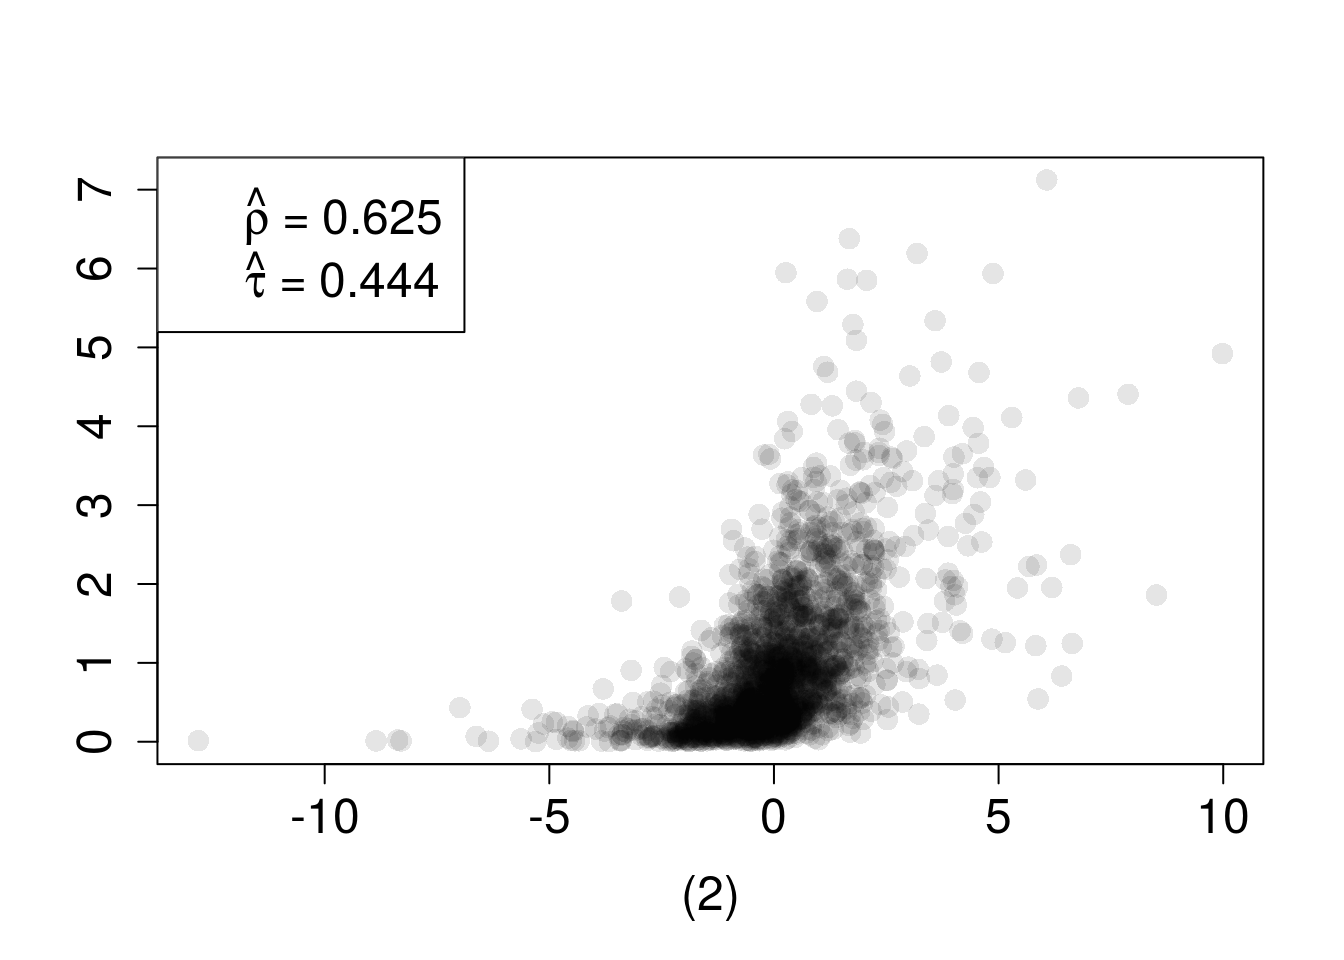 n=2000 random draws from the bivariate distribution constructed with a normal copula and (1) standard normal margins or (2) Student-$t_3$ and $exp(1)$ margins. True $\rho=0.6322$ and $\tau=0.4505$